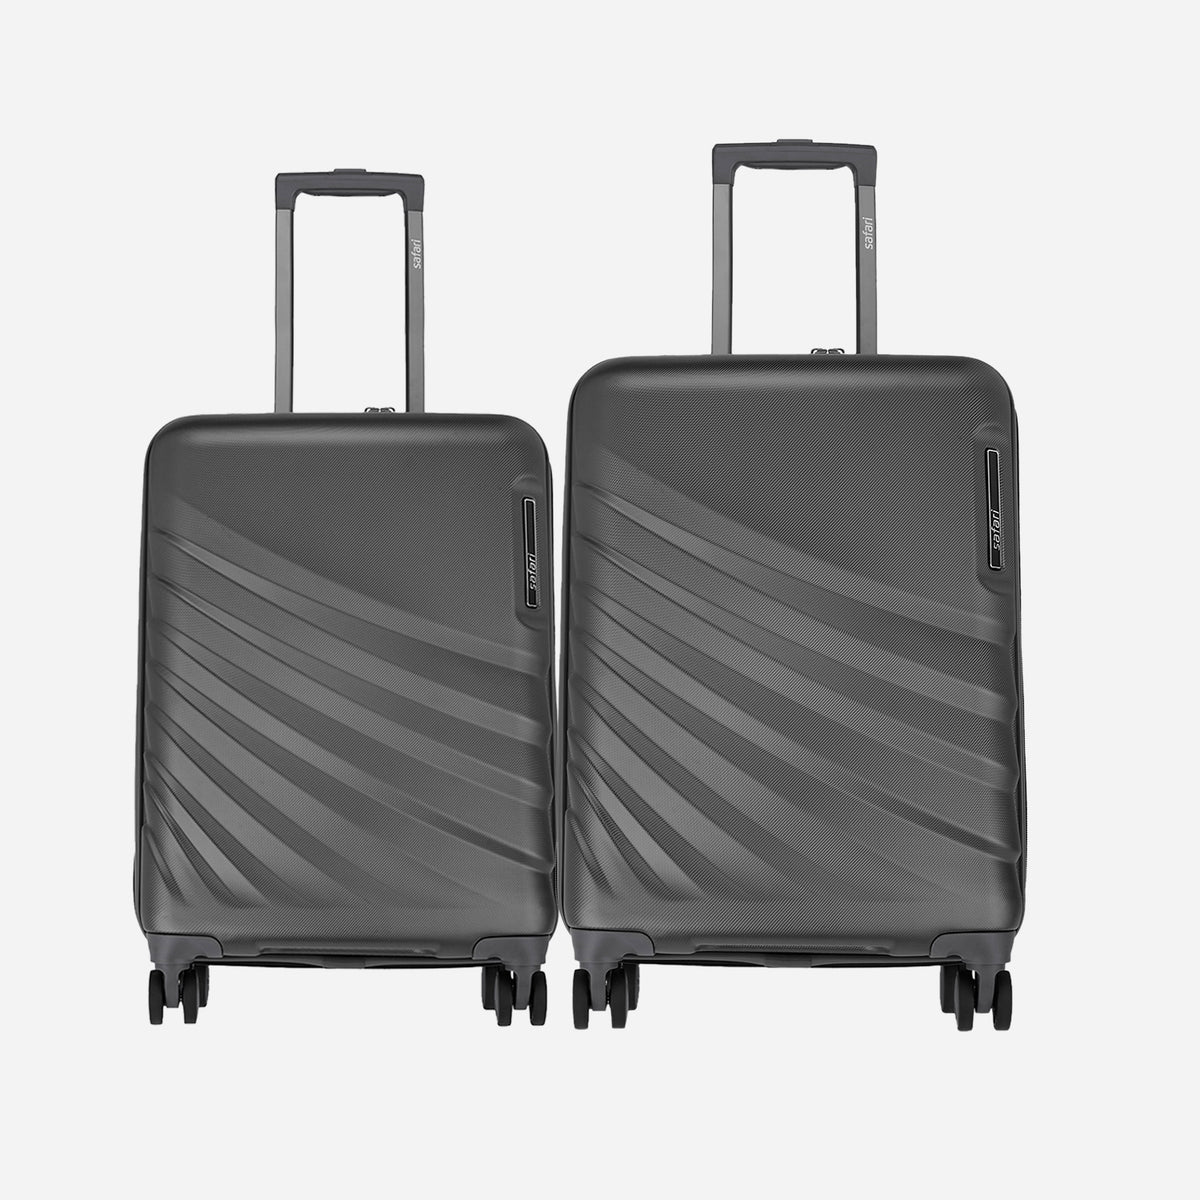 Safari Polaris Pro Castle Black Trolley Bag Combo of Small and medium with TSA Lock, Dual wheels, Side Hooks and Wet Pouch